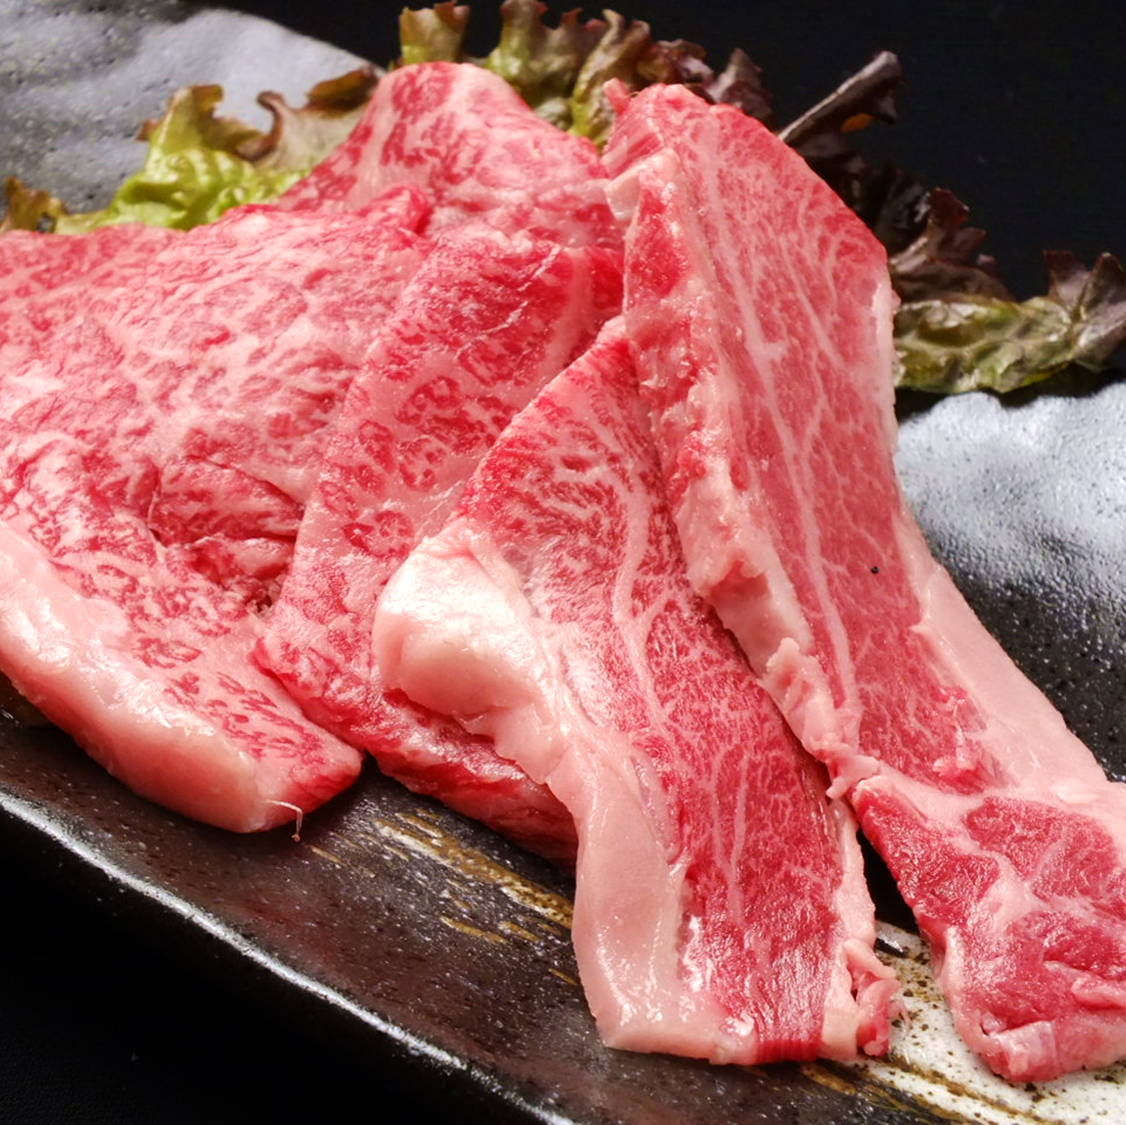 You can enjoy A5 rank Japanese black beef "Wagyu" from Kumamoto prefecture at a great price ♪